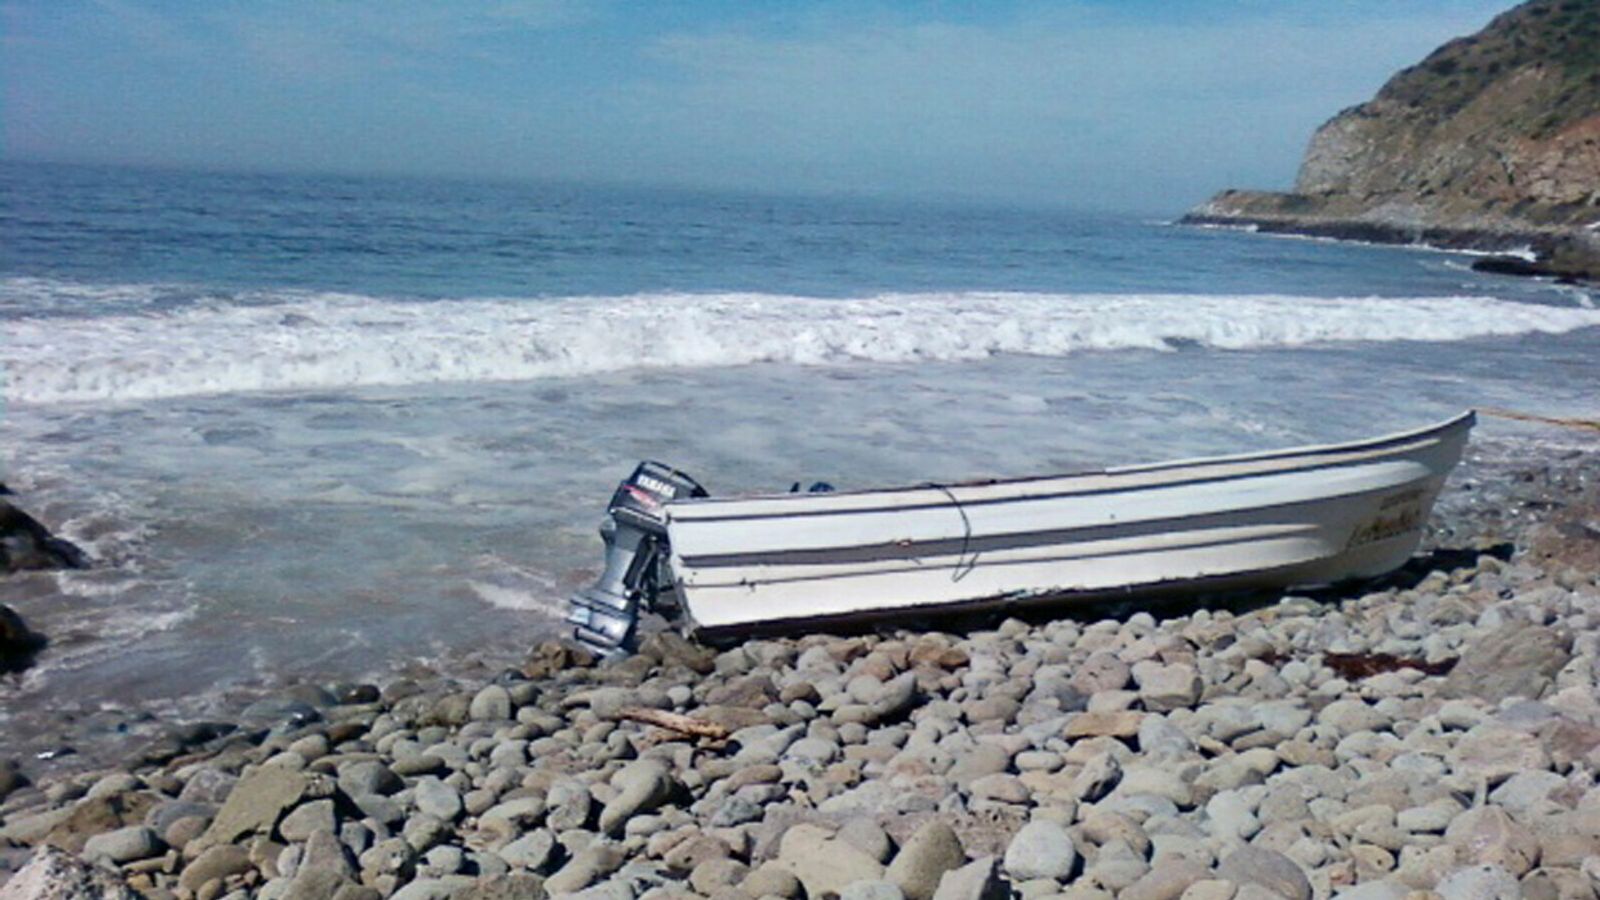 Eight people killed as suspected smuggling boats capsize off San Diego coast